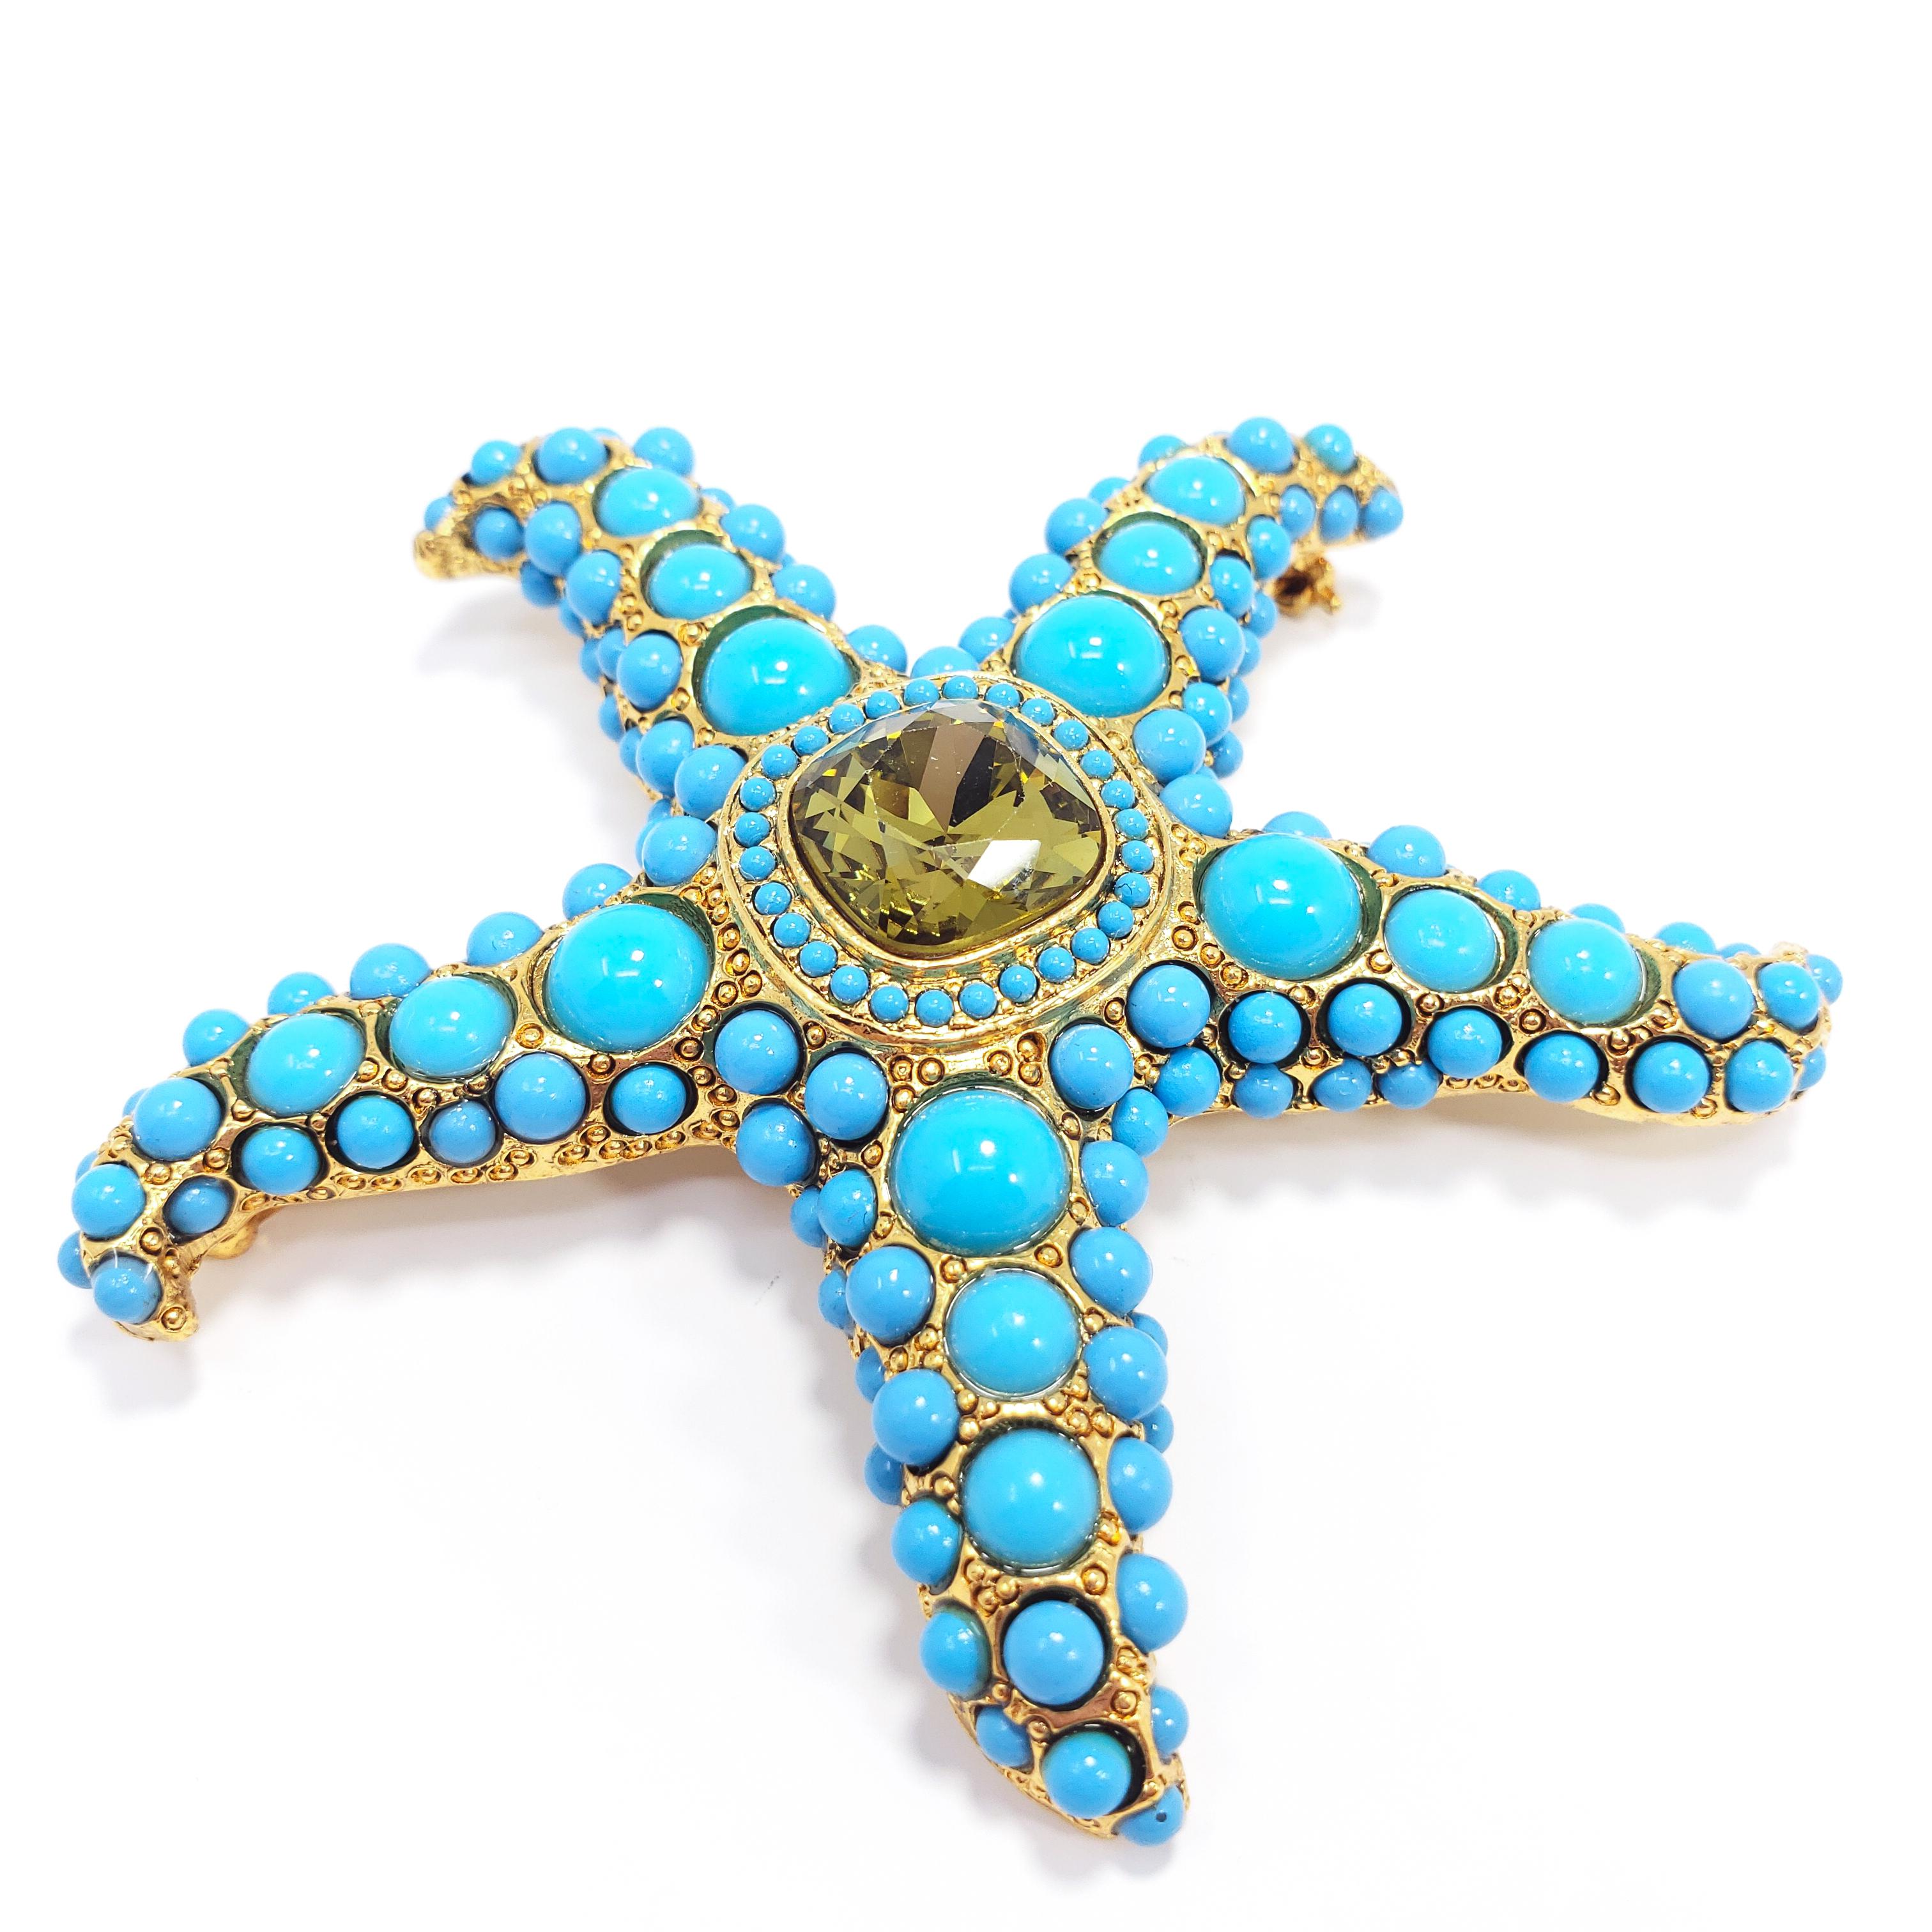 A nautical-themed starfish brooch/pin decorated with pave turquoise cabochons and a centerpiece olive crystal. Gold plated metal setting.

Hallmarks: Kenneth © Lane